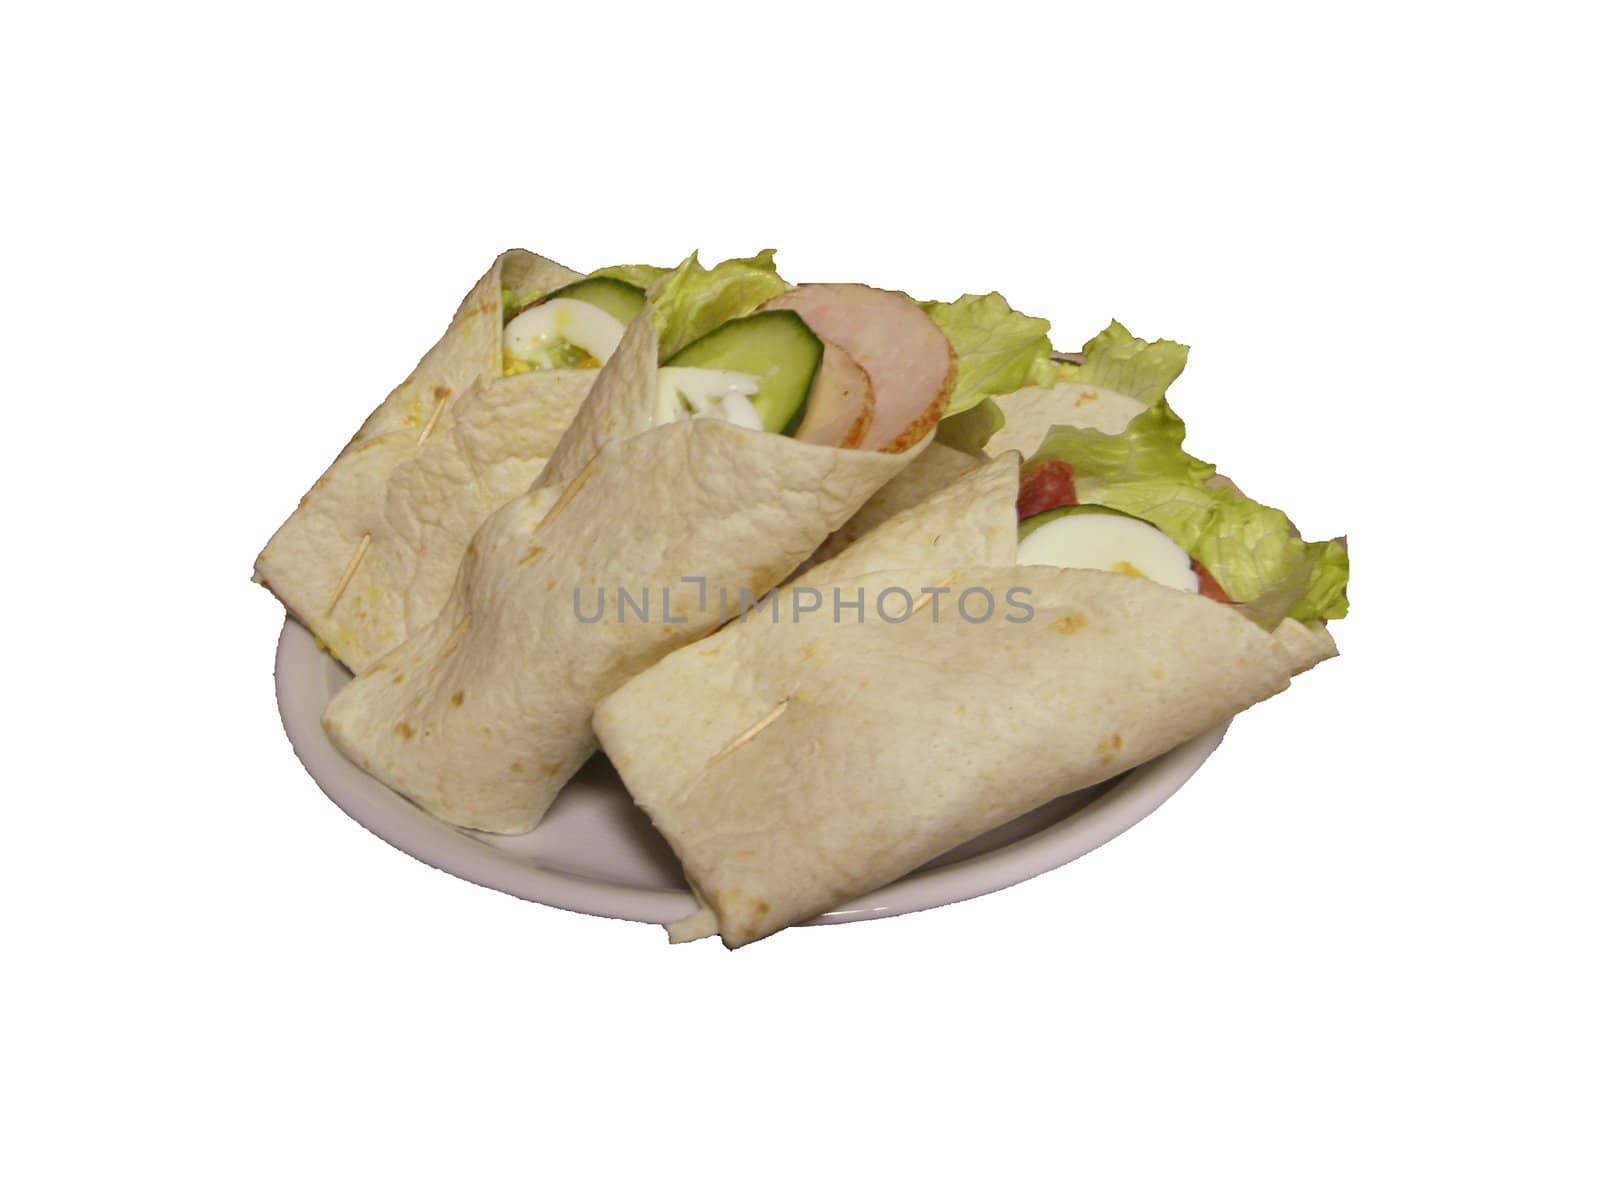 home-made wraps on a white plate. Provided free object.